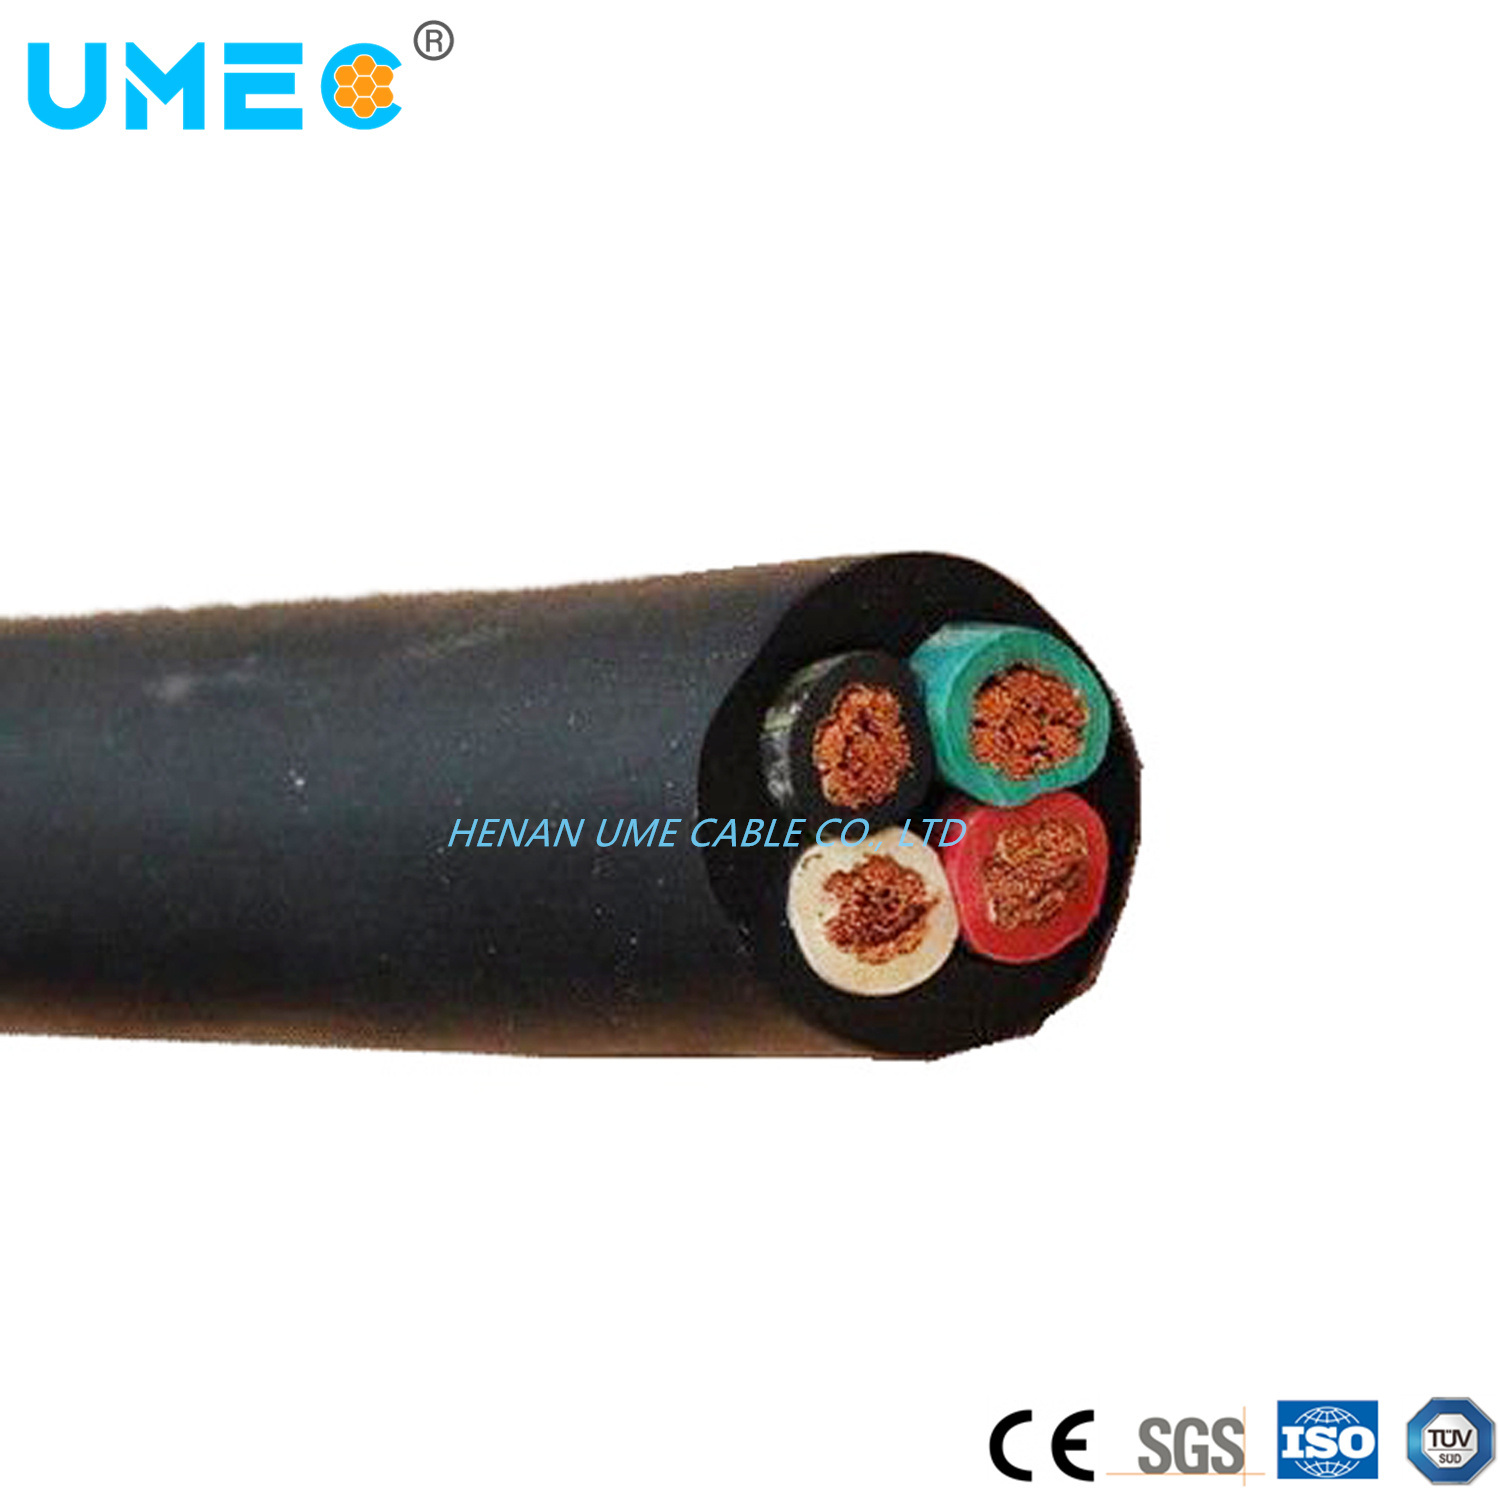 Electrical 450/750V Flexible Soft Rubber Cable H07rn-F 3gx1.5sqmm 2.5sqm 4sqmm 6sqmm 10sqmm Electric Cable Wire